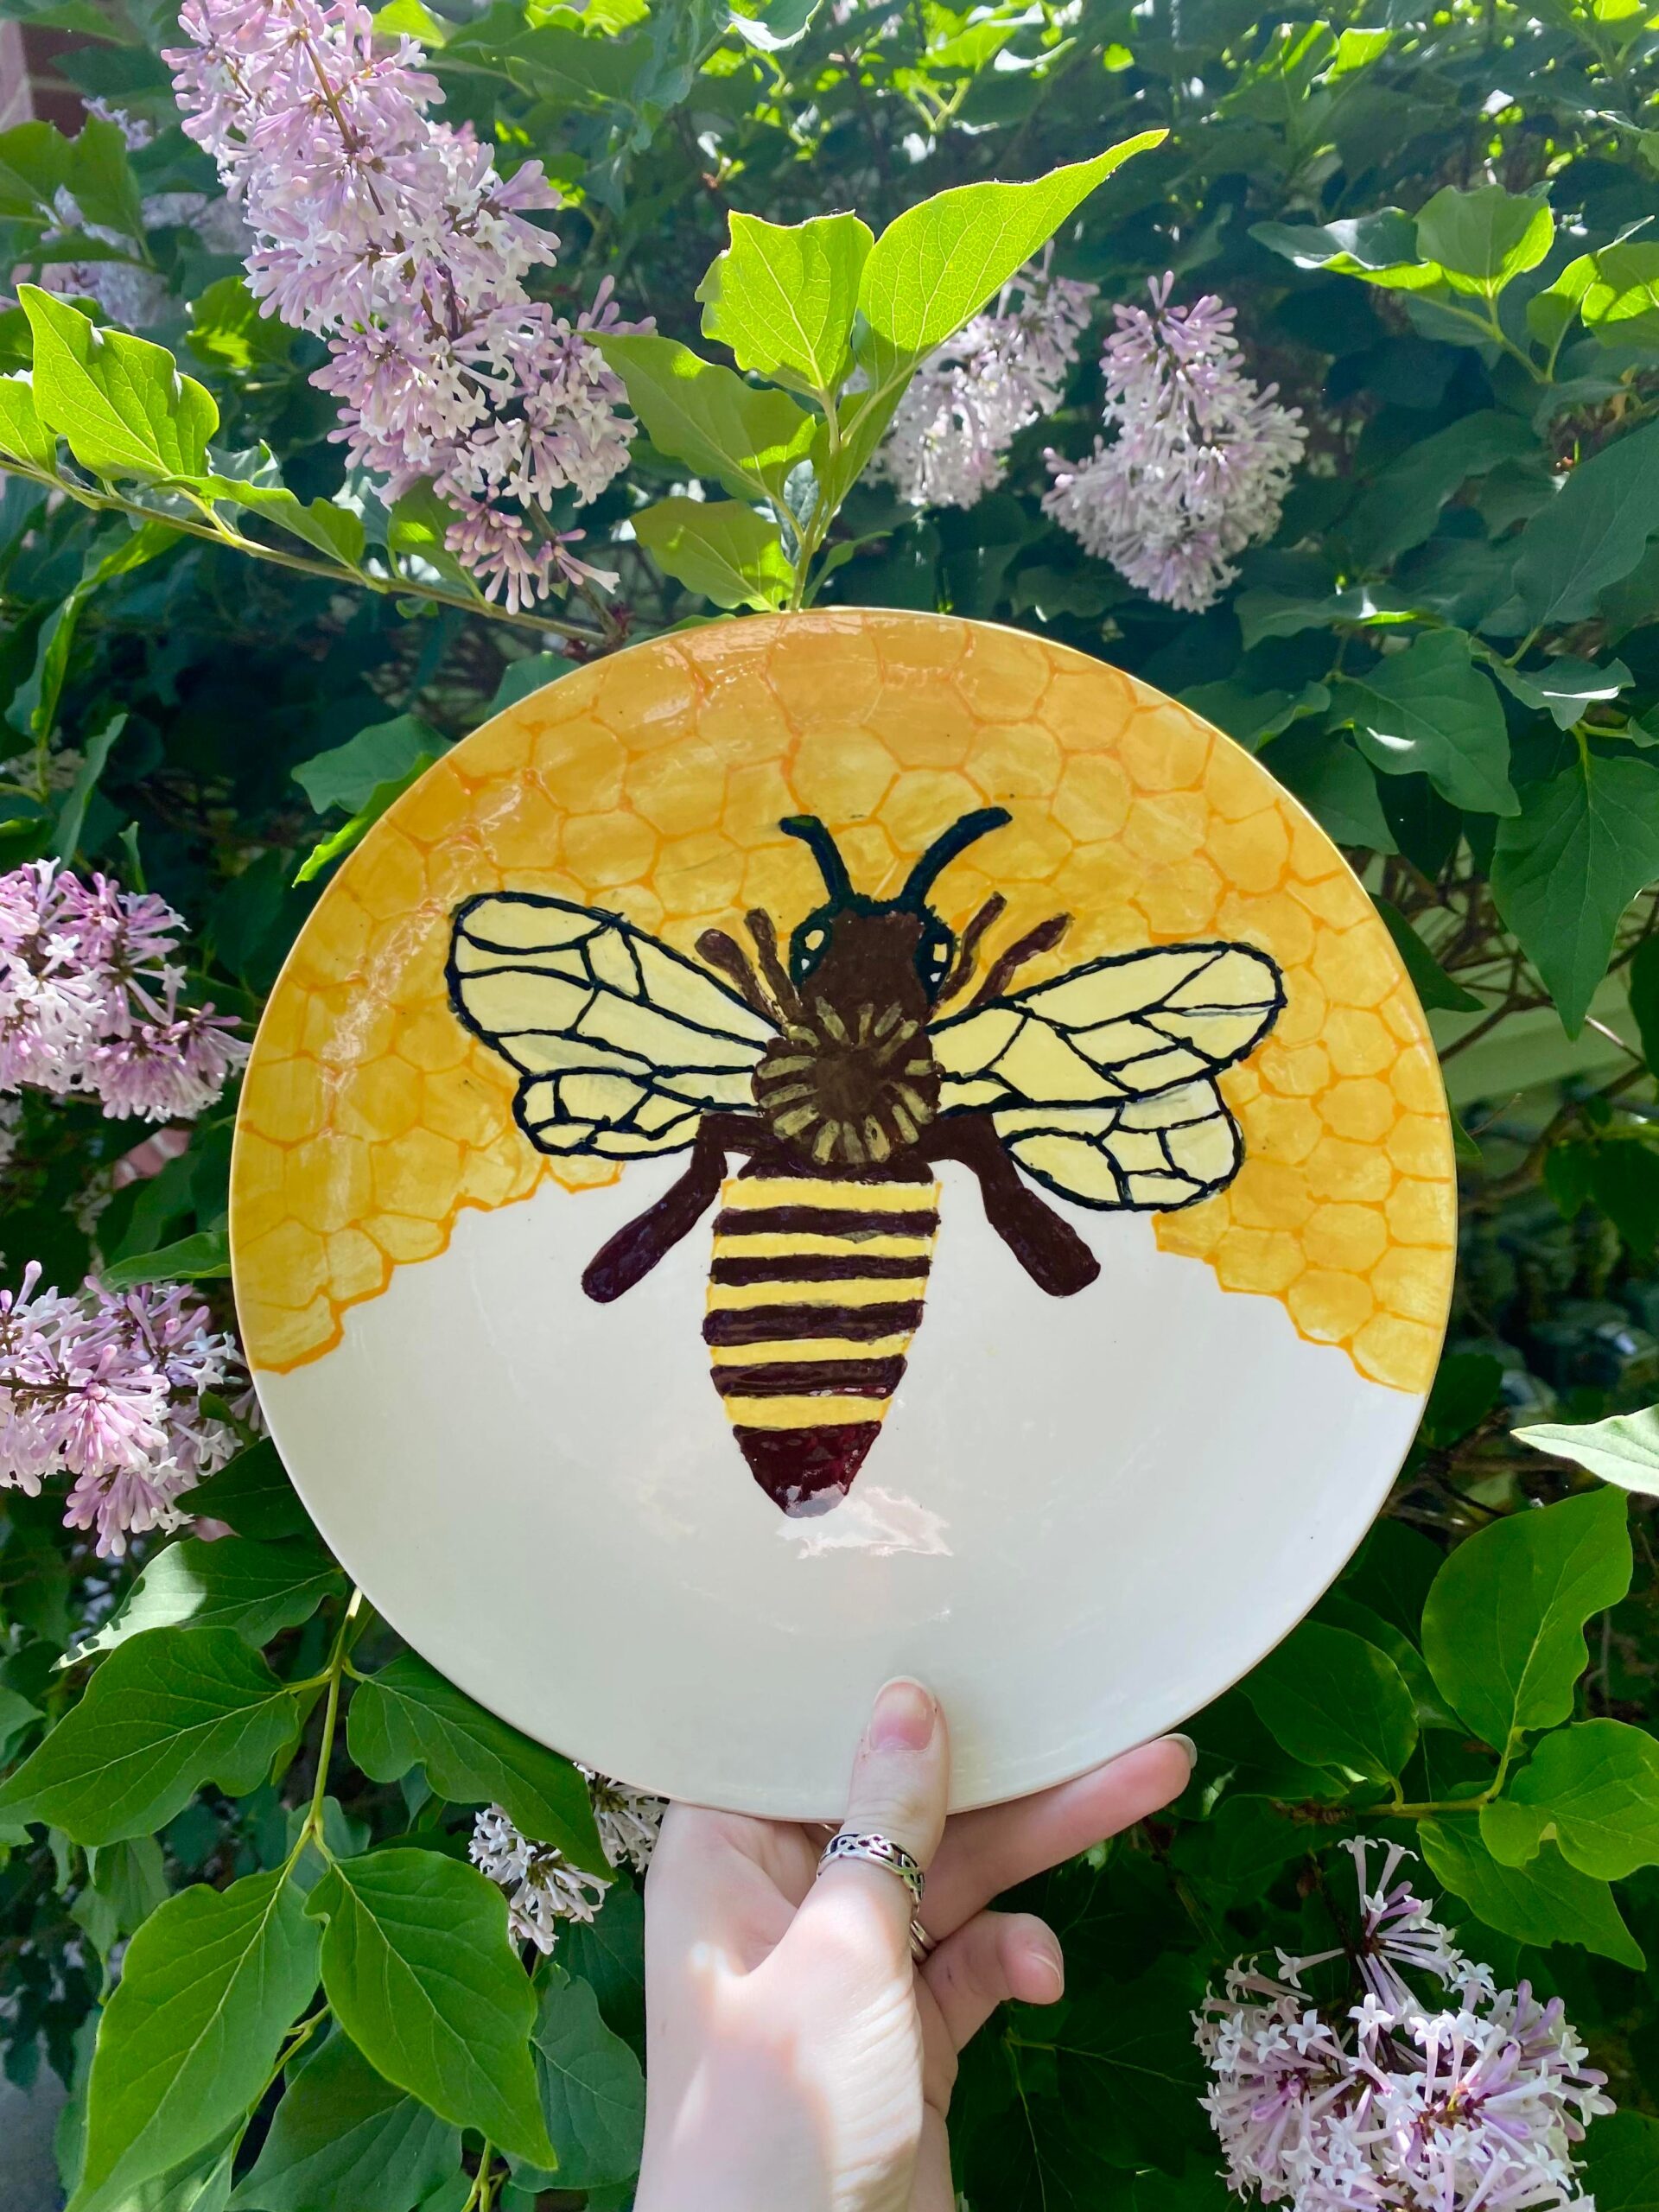 A hand holding up a plate with a bee on it.